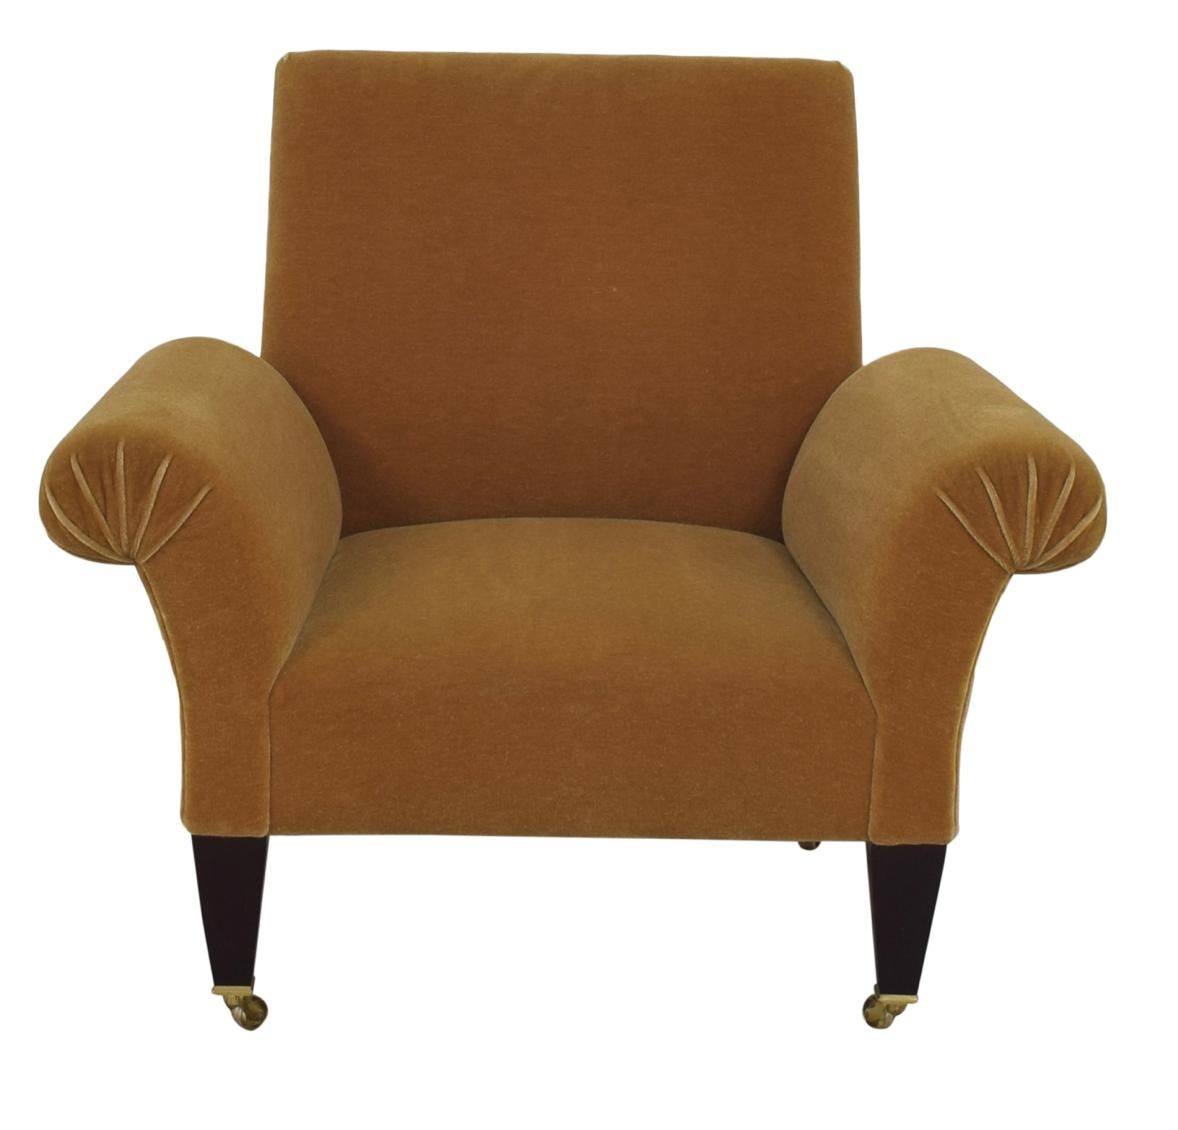 George Smith Whiskey Mohair custom butterfly armchair, accent lounge chair. MSRP of over 8500 USD. Each piece of George Smith furniture is meticulously handmade by a team of master joiners and upholsterers in the north of England, using responsibly